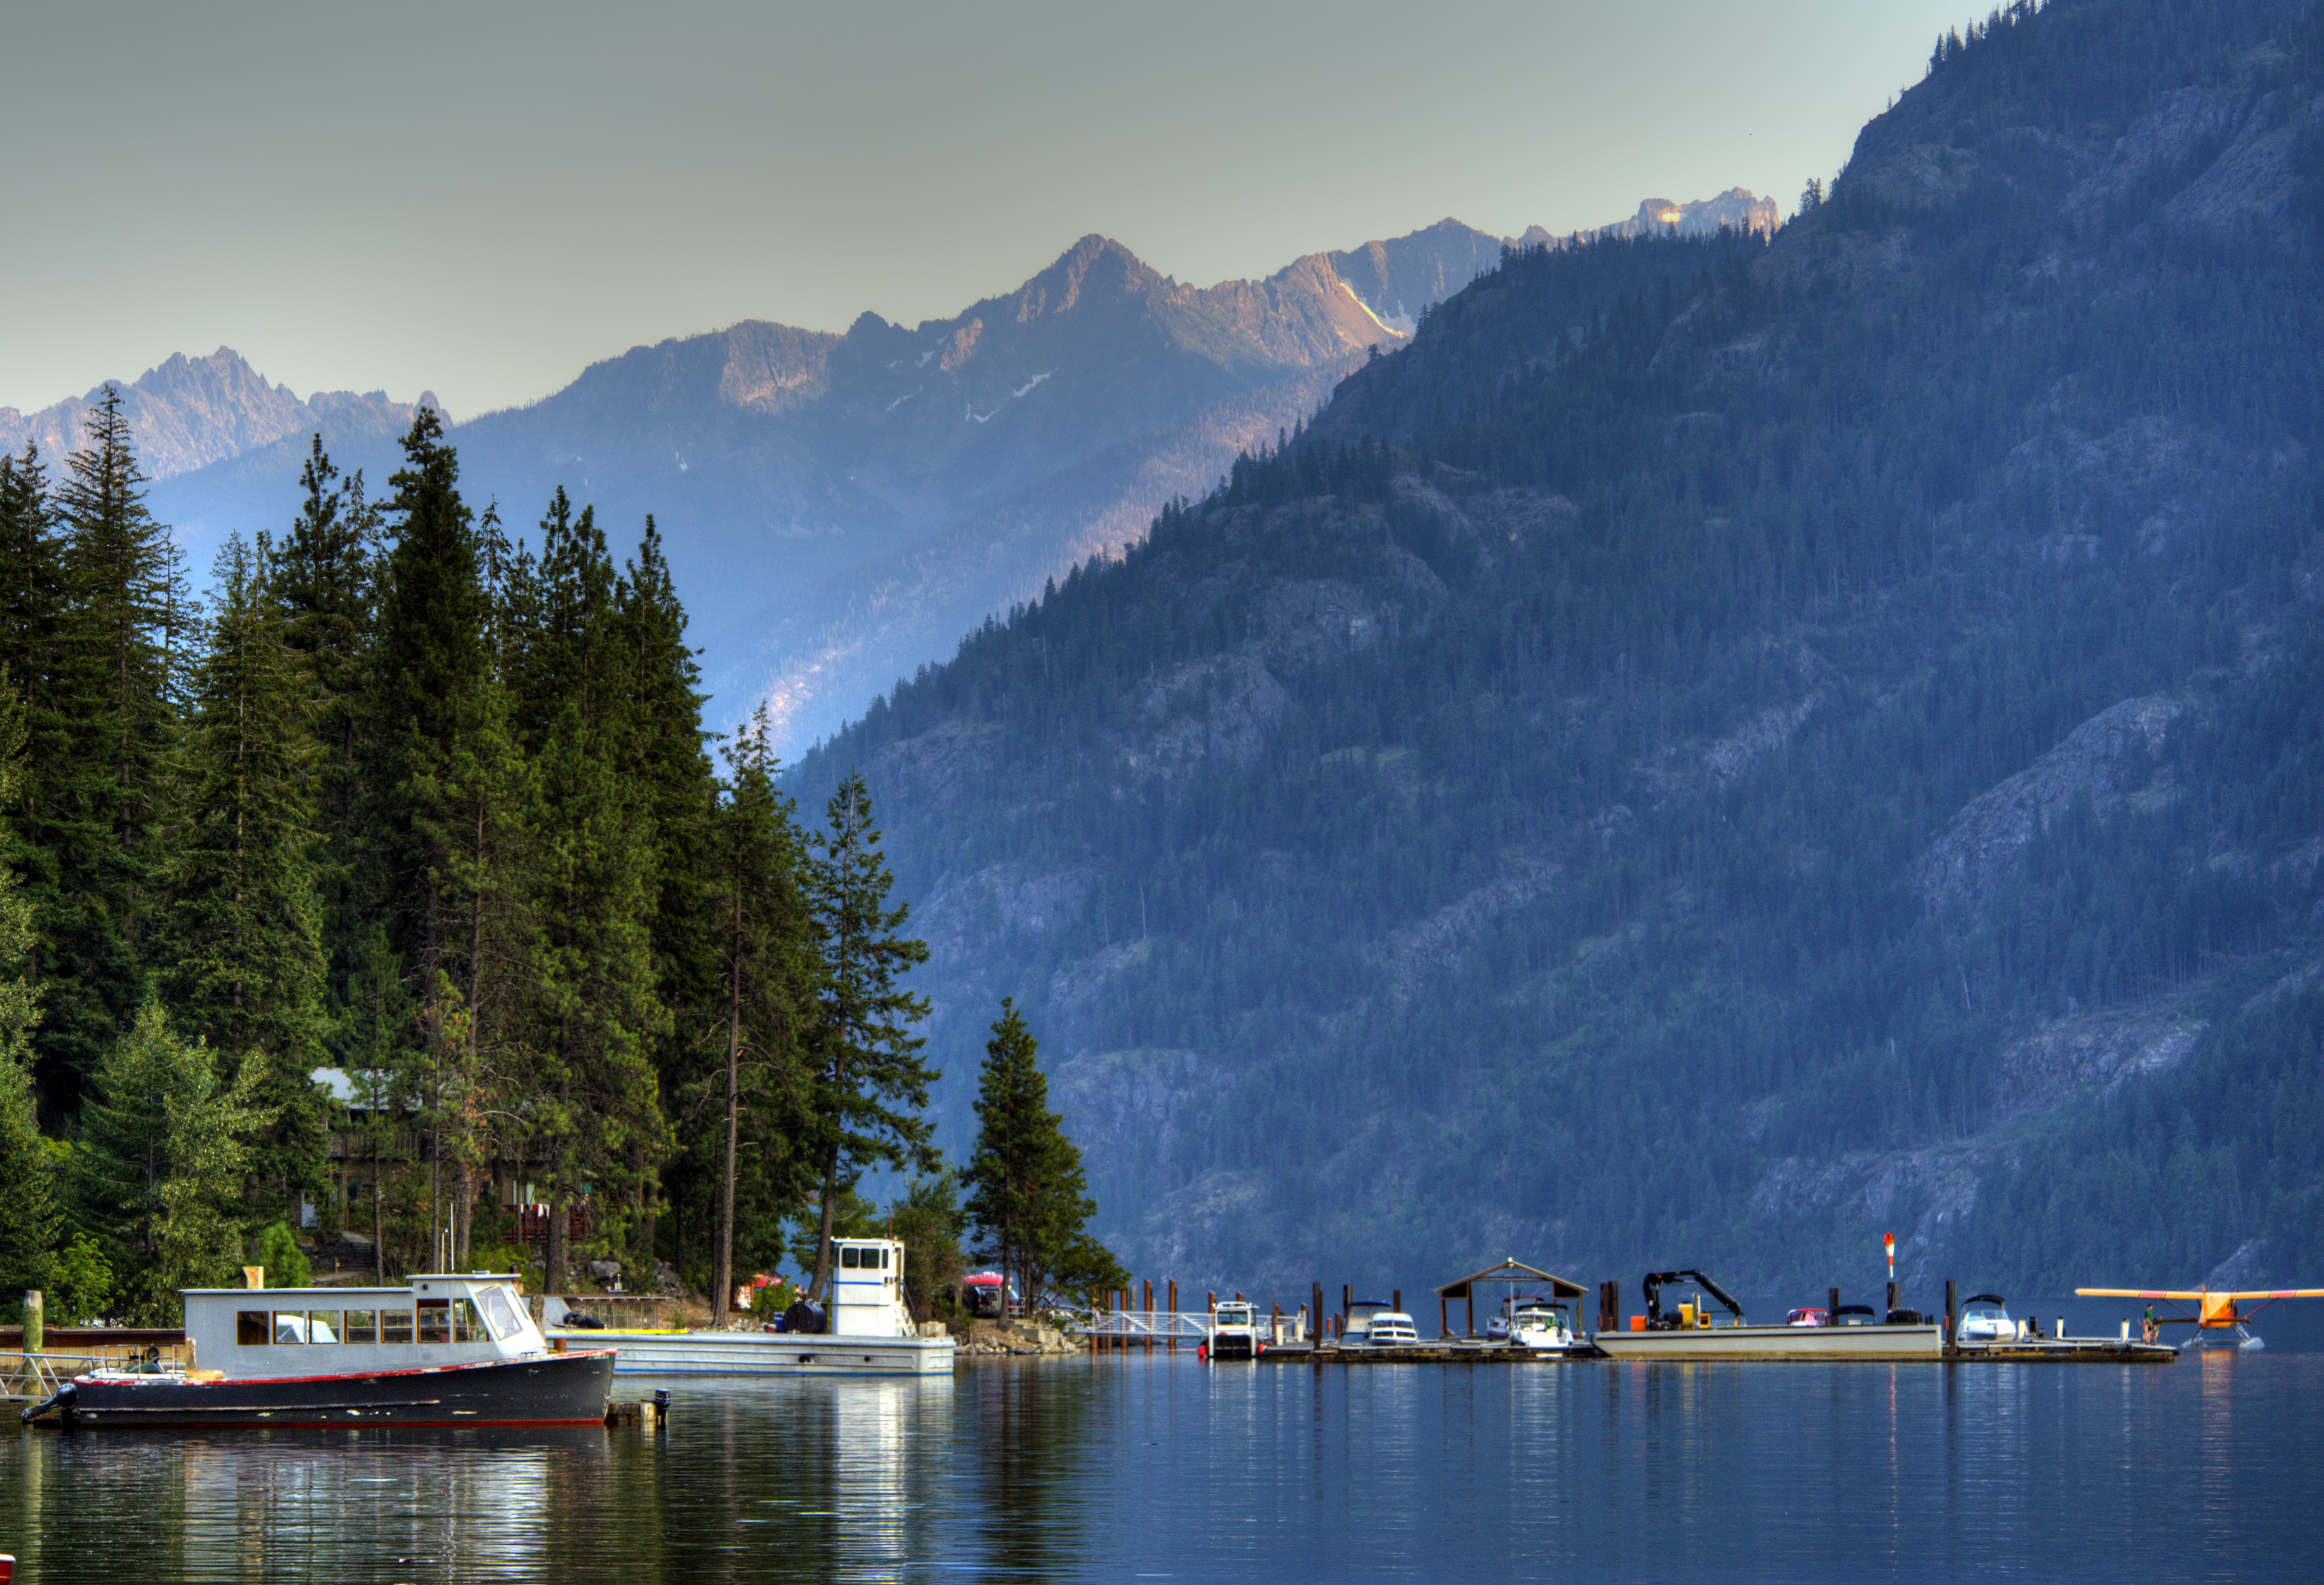 boats on the water with mountains and trees surrounding